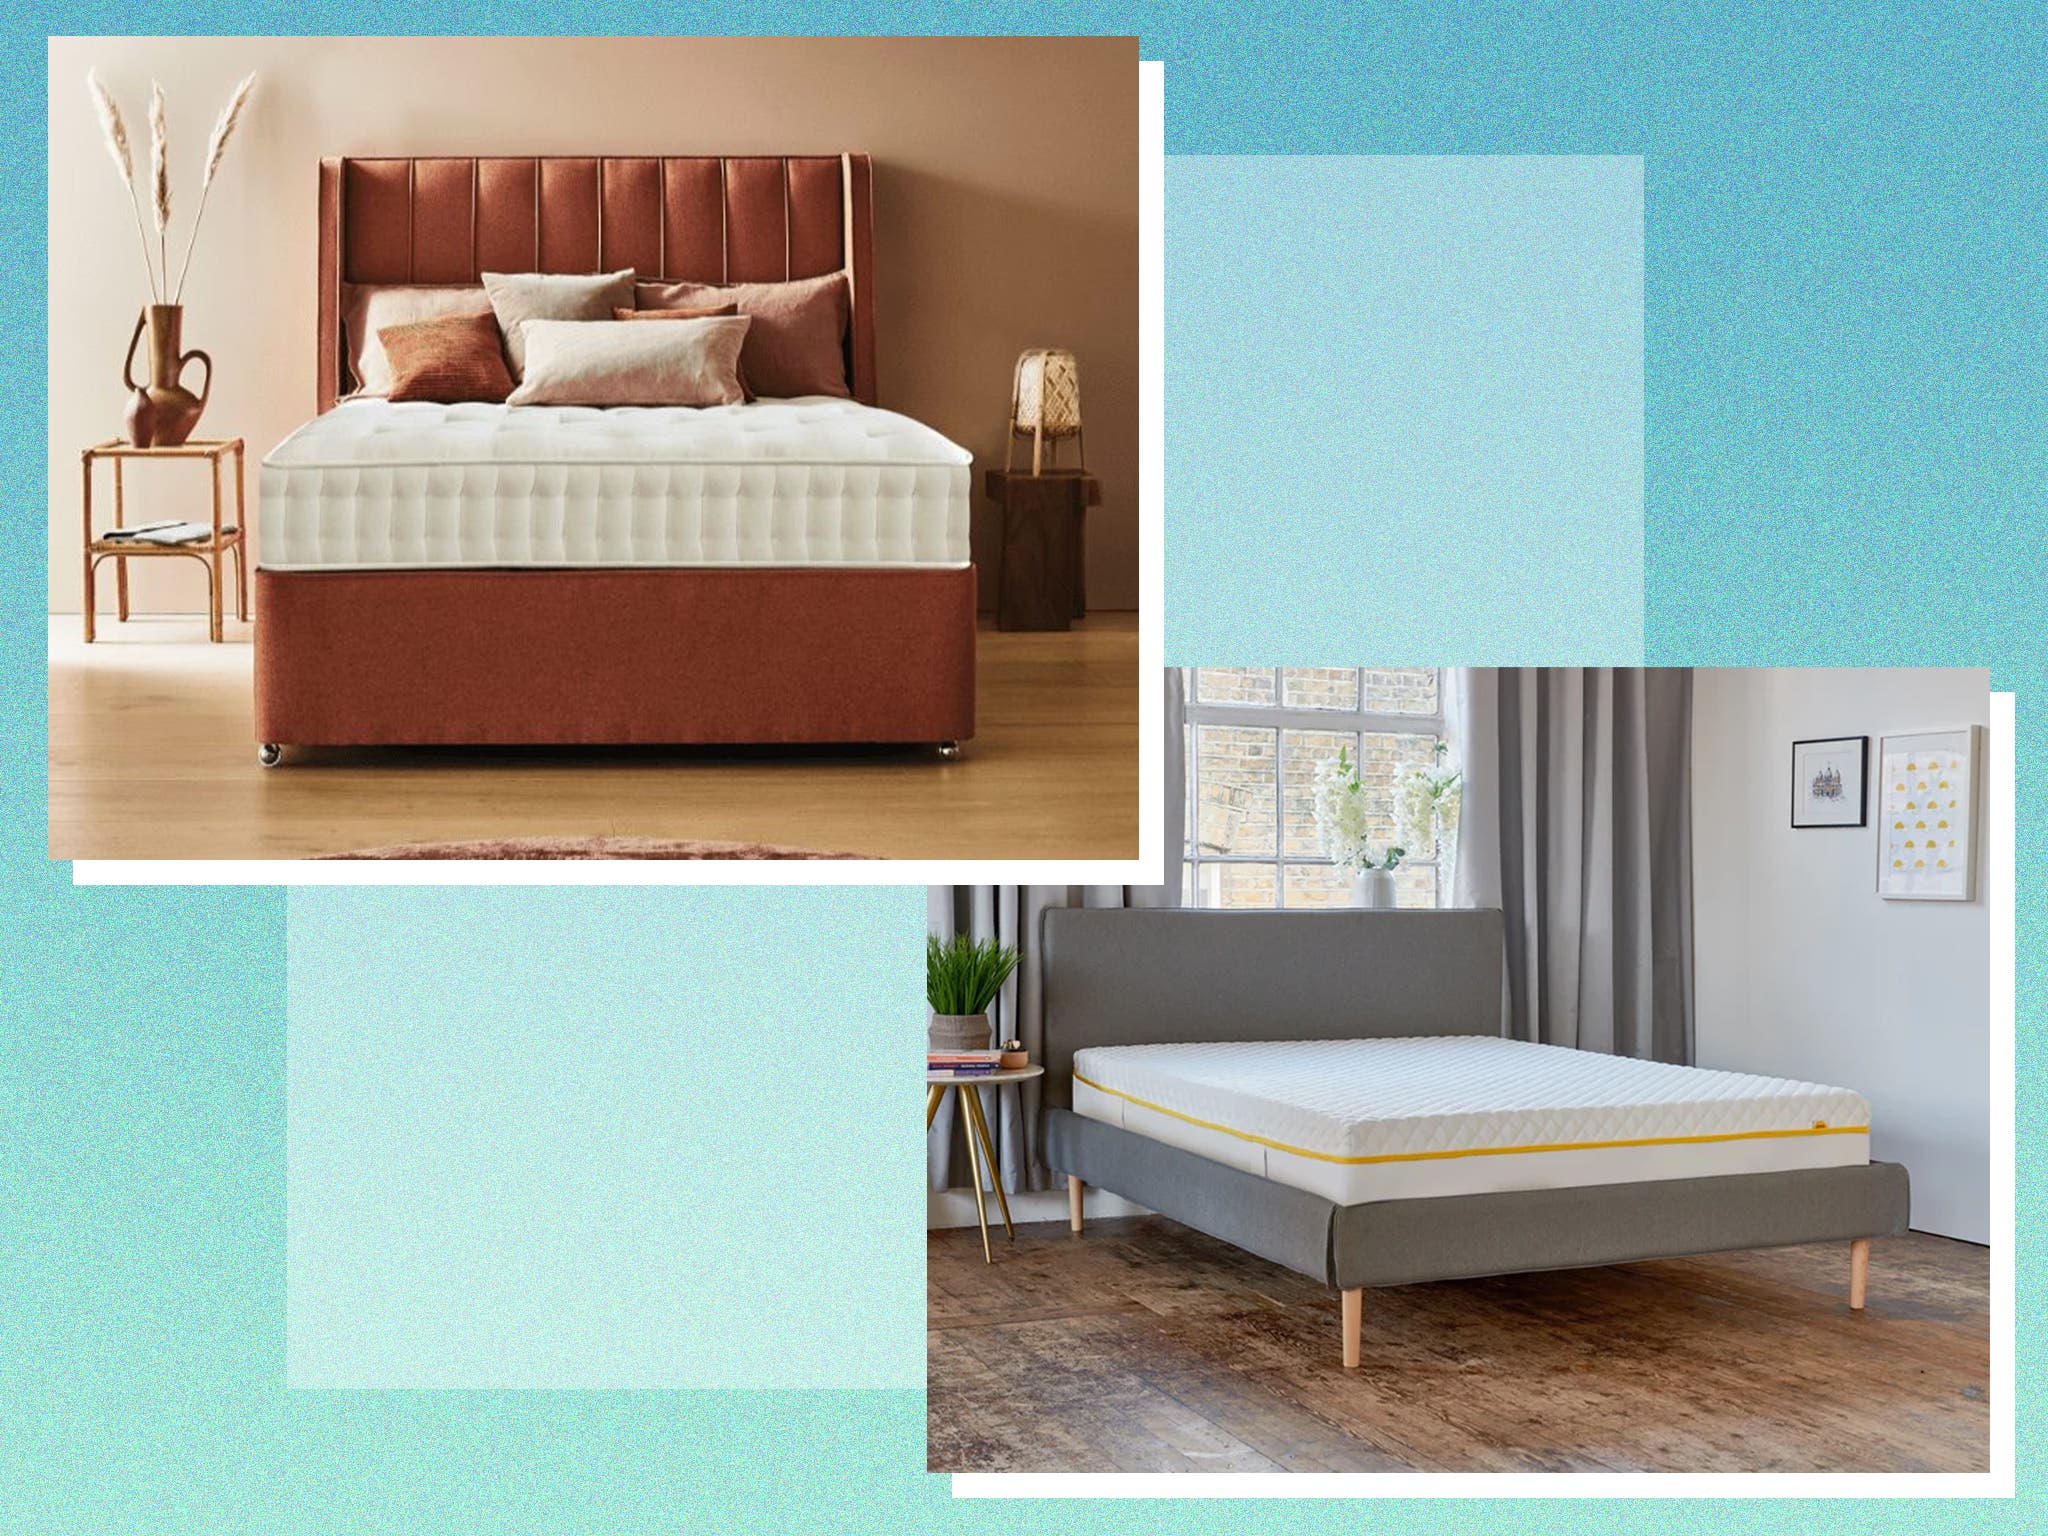 Other tips to extend the lifespan of your memory foam mattress